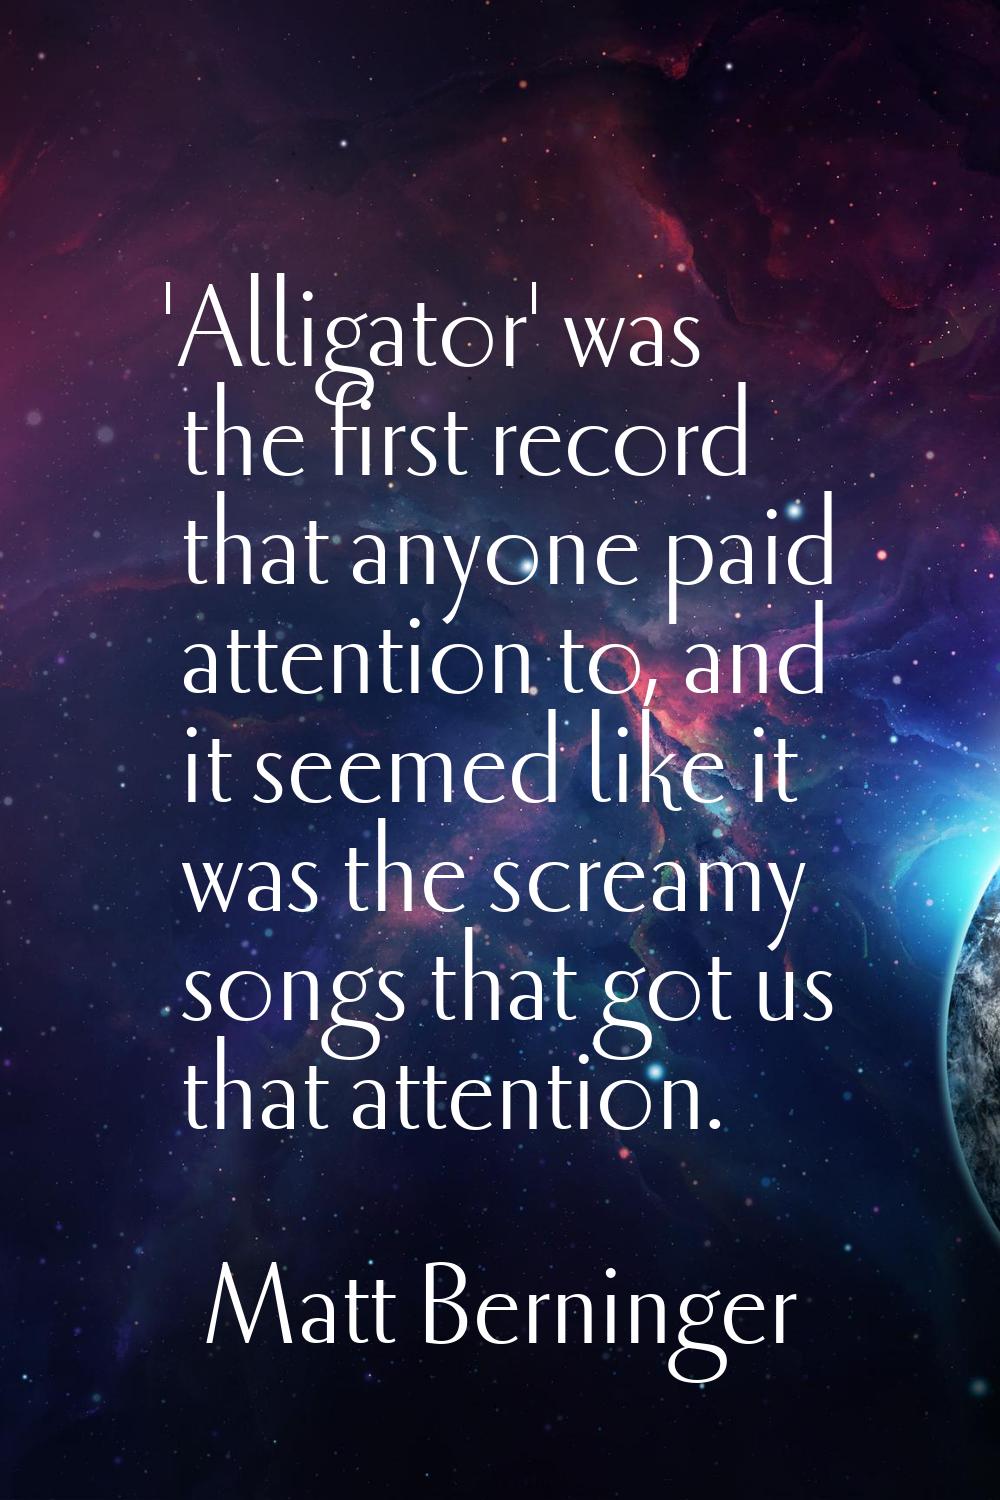 'Alligator' was the first record that anyone paid attention to, and it seemed like it was the screa